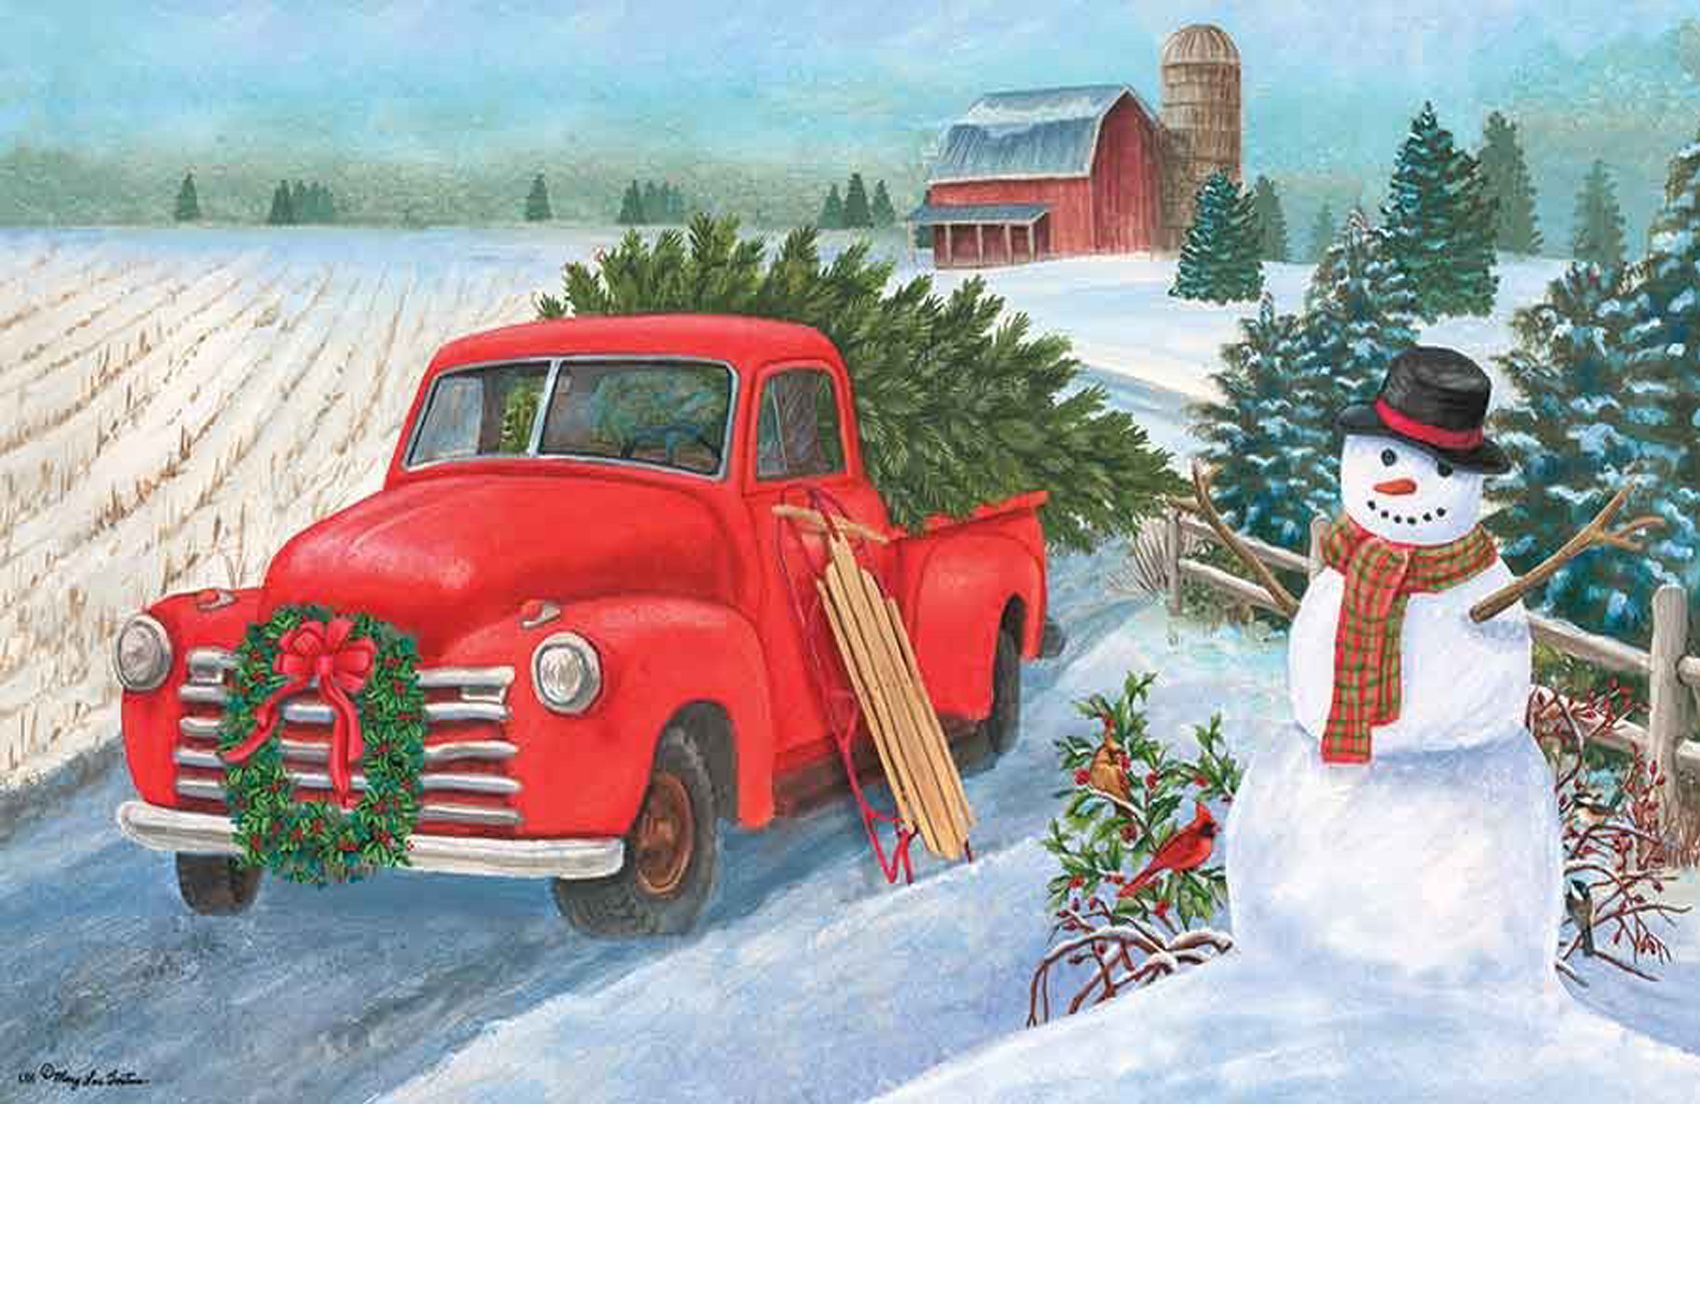 Autumn Lover christmasautumnaesthetics  Instagram photos and videos  Christmas  red truck Christmas truck Country christmas